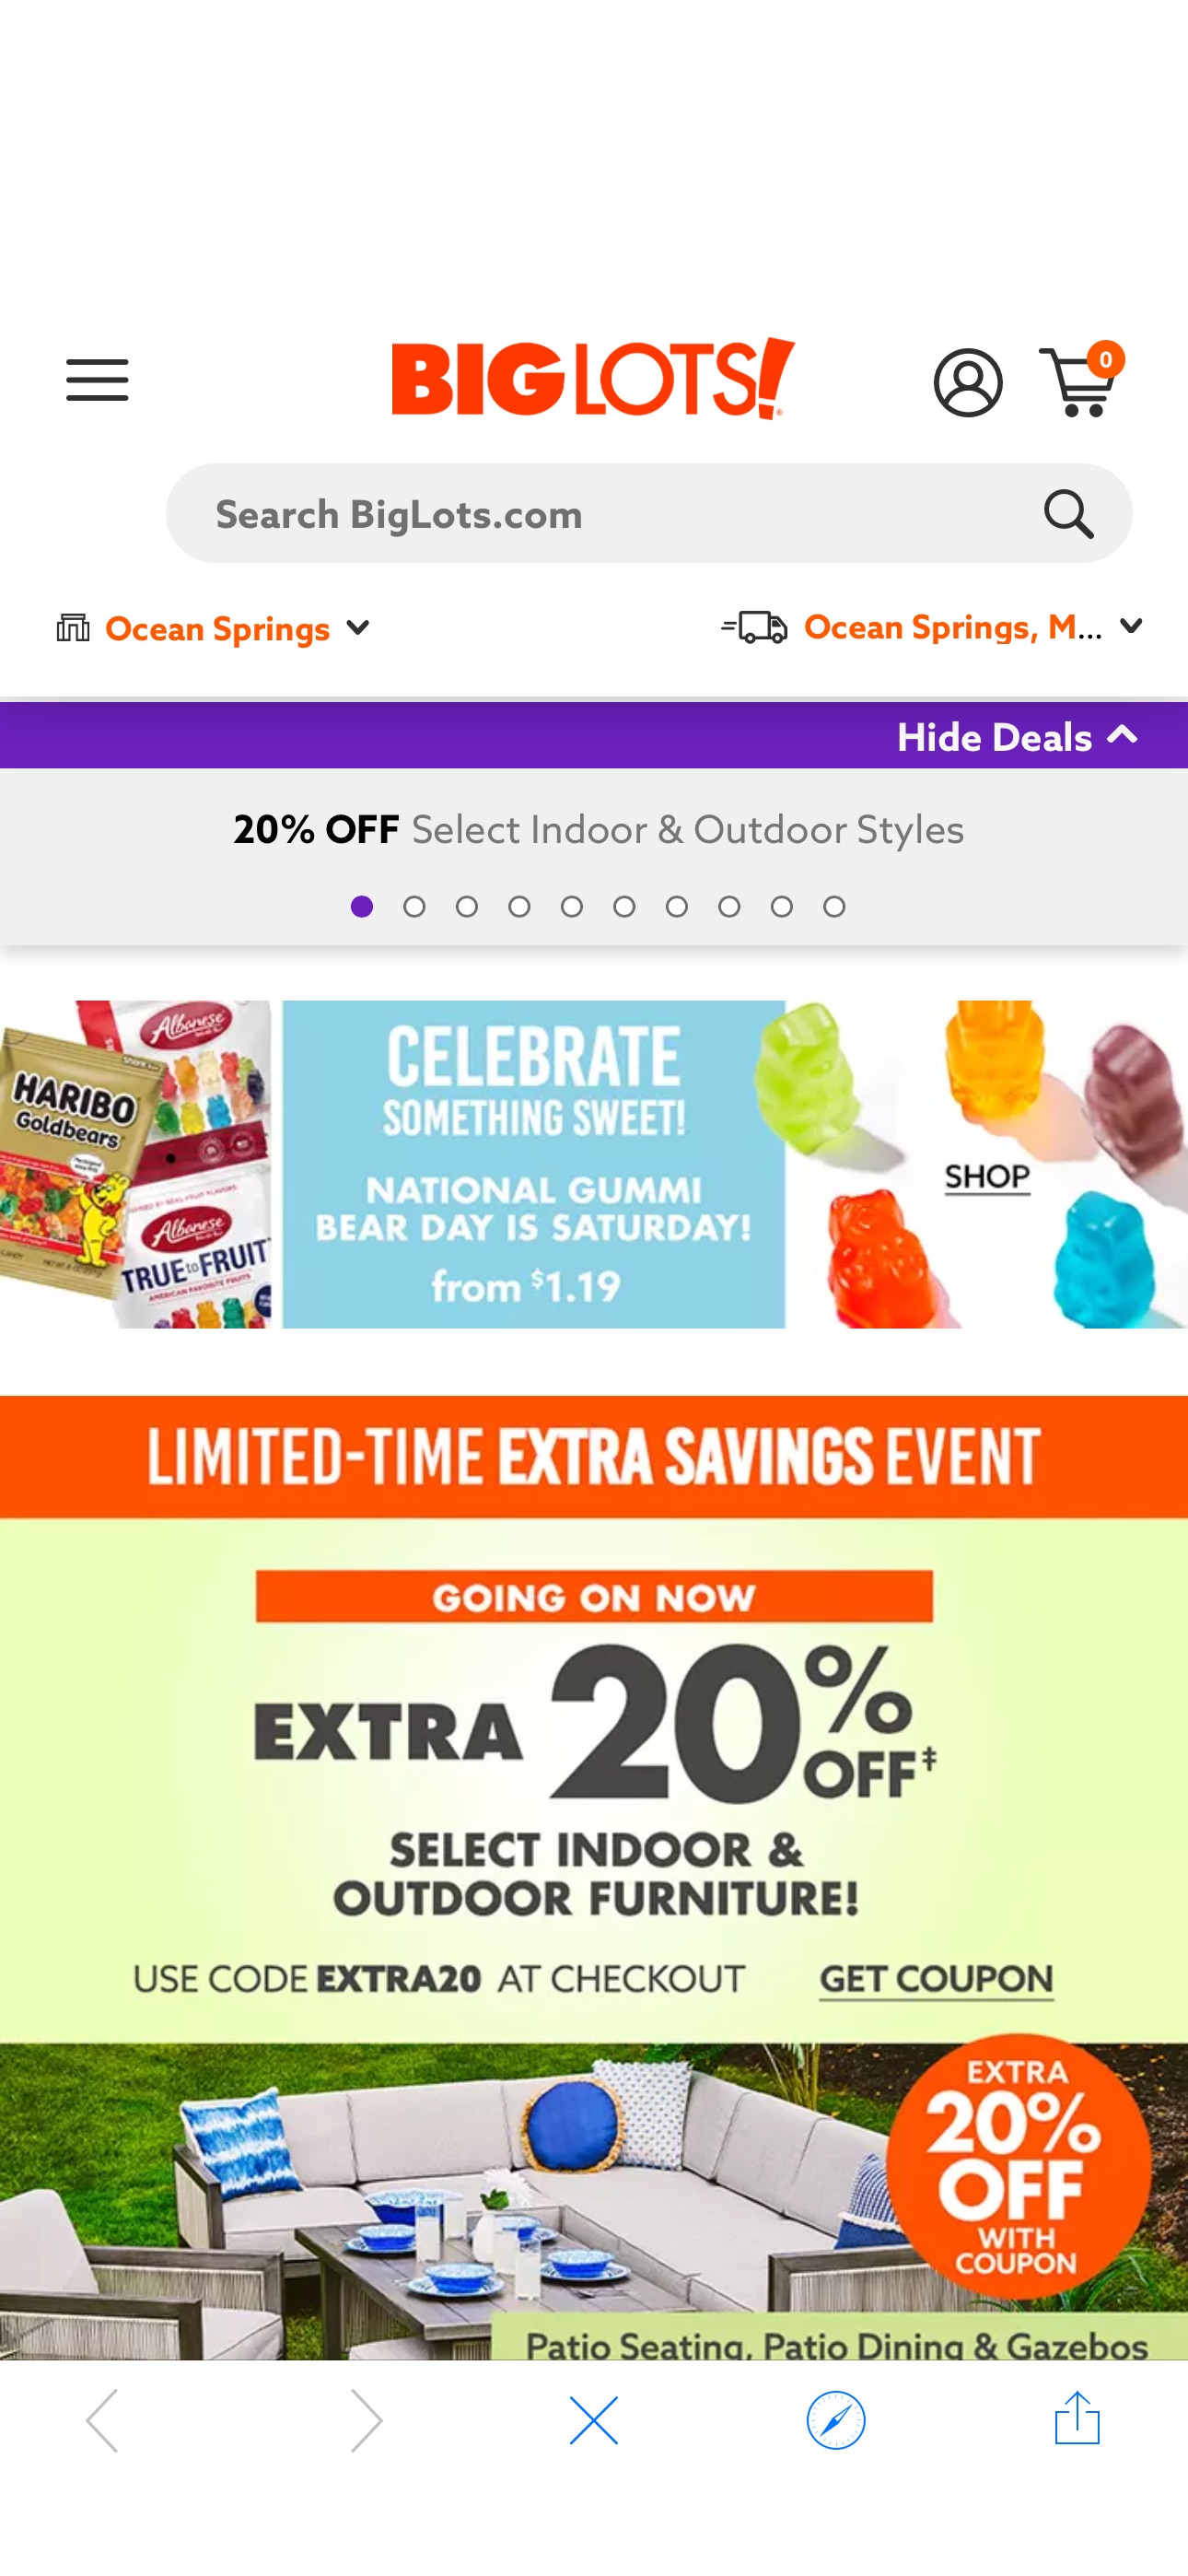 Big Lots! BIG Deals on Everything for Your Home Extra 20% off Select Indoor & Outdoor Furniture at Big Lots with coupon!

Use code EXTRA20